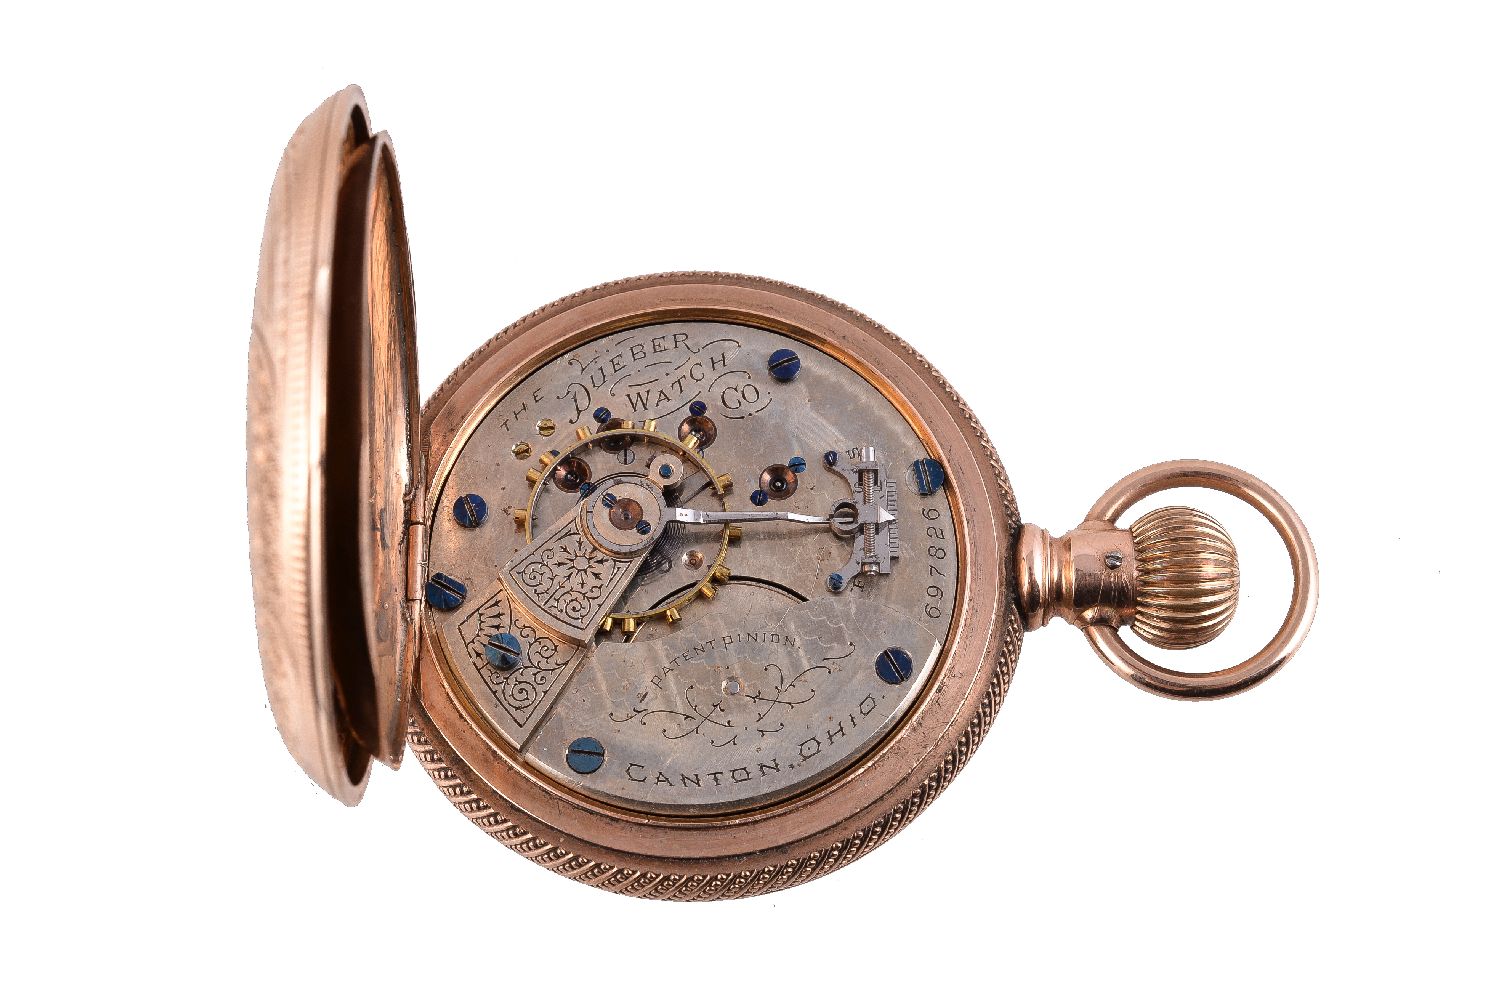 The Dueber Watch Co., Gold coloured full hunter keyless wind pocket watch - Image 4 of 4